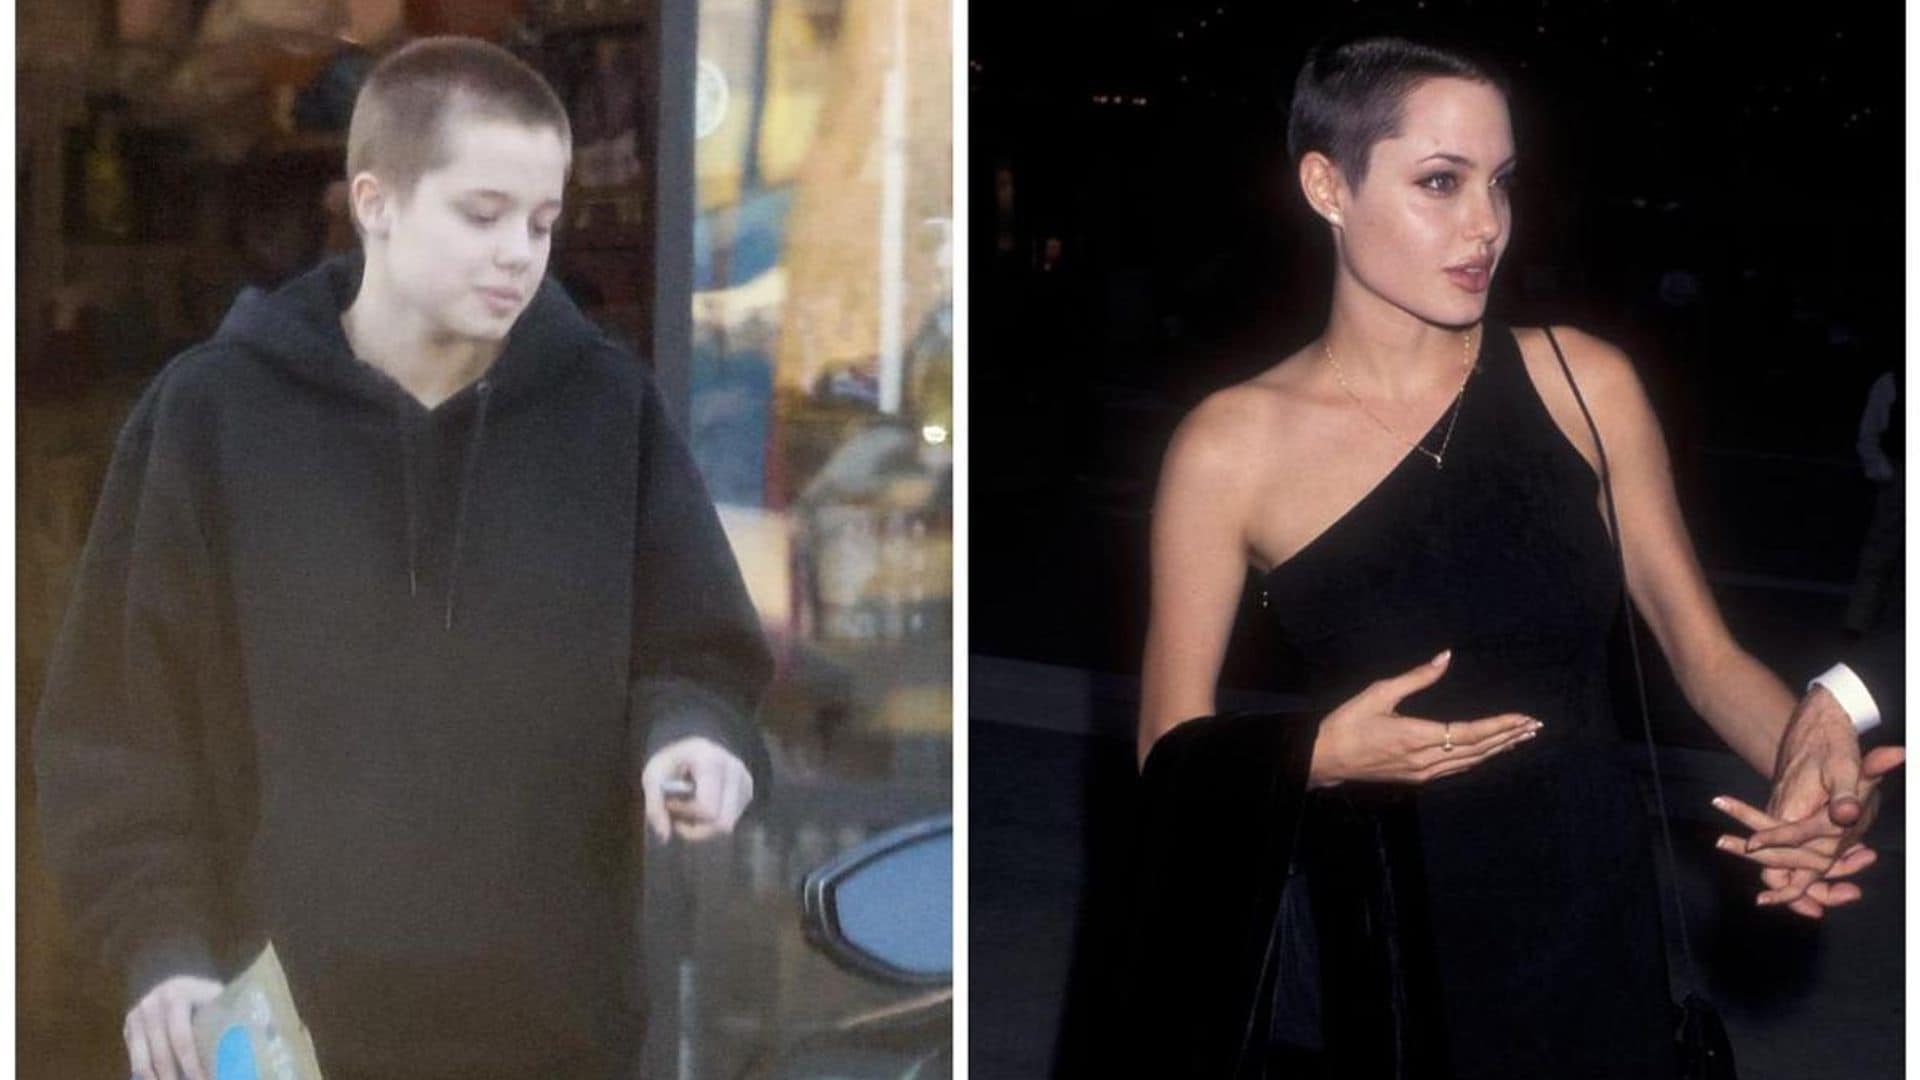 Shiloh Jolie-Pitt channels mom Angelina Jolie with a new buzz haircut